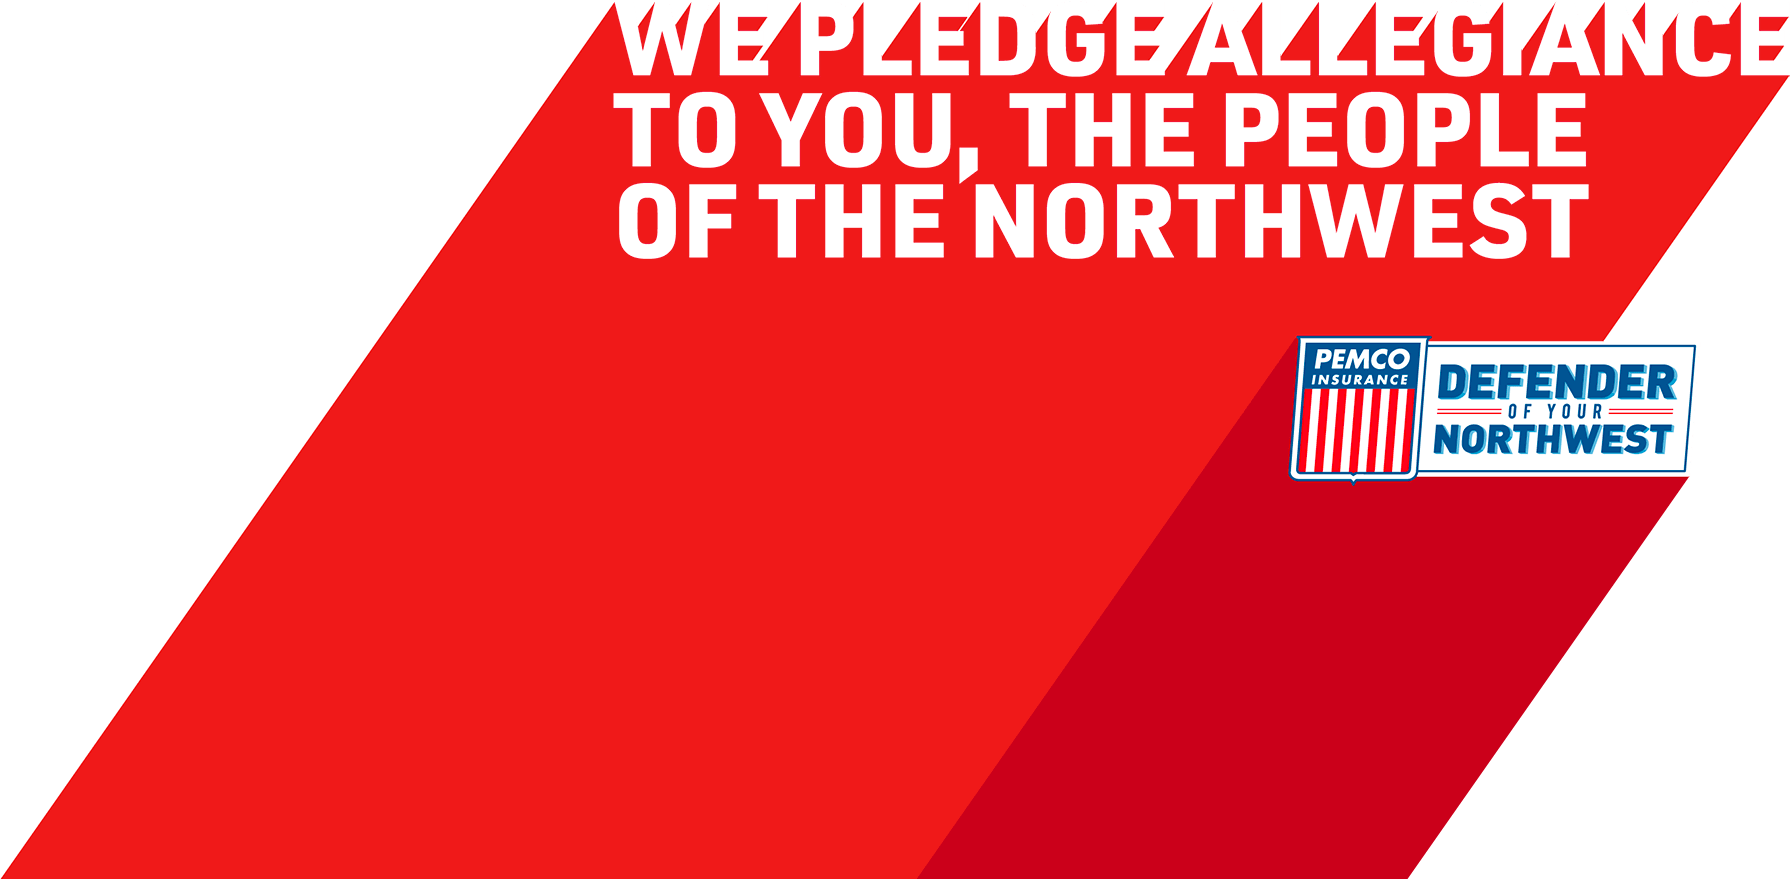 We pledge allegiance to you, the people of the Northwest.